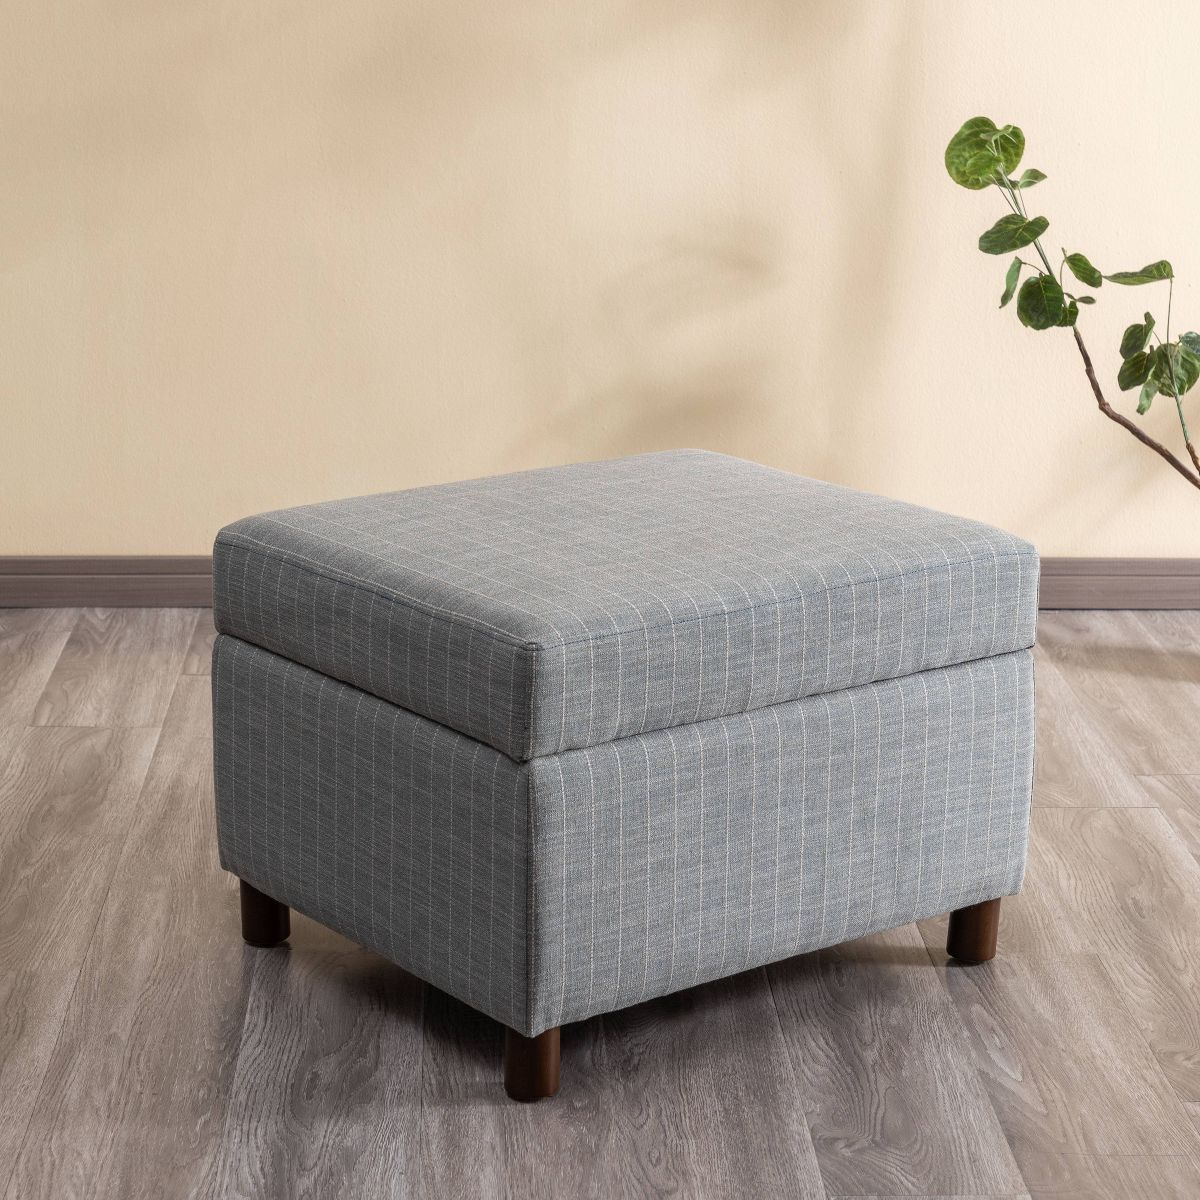 25" Wide Rectangle Storage Ottoman with Wood Legs and Hinged Lid - WOVENBYRD | Target